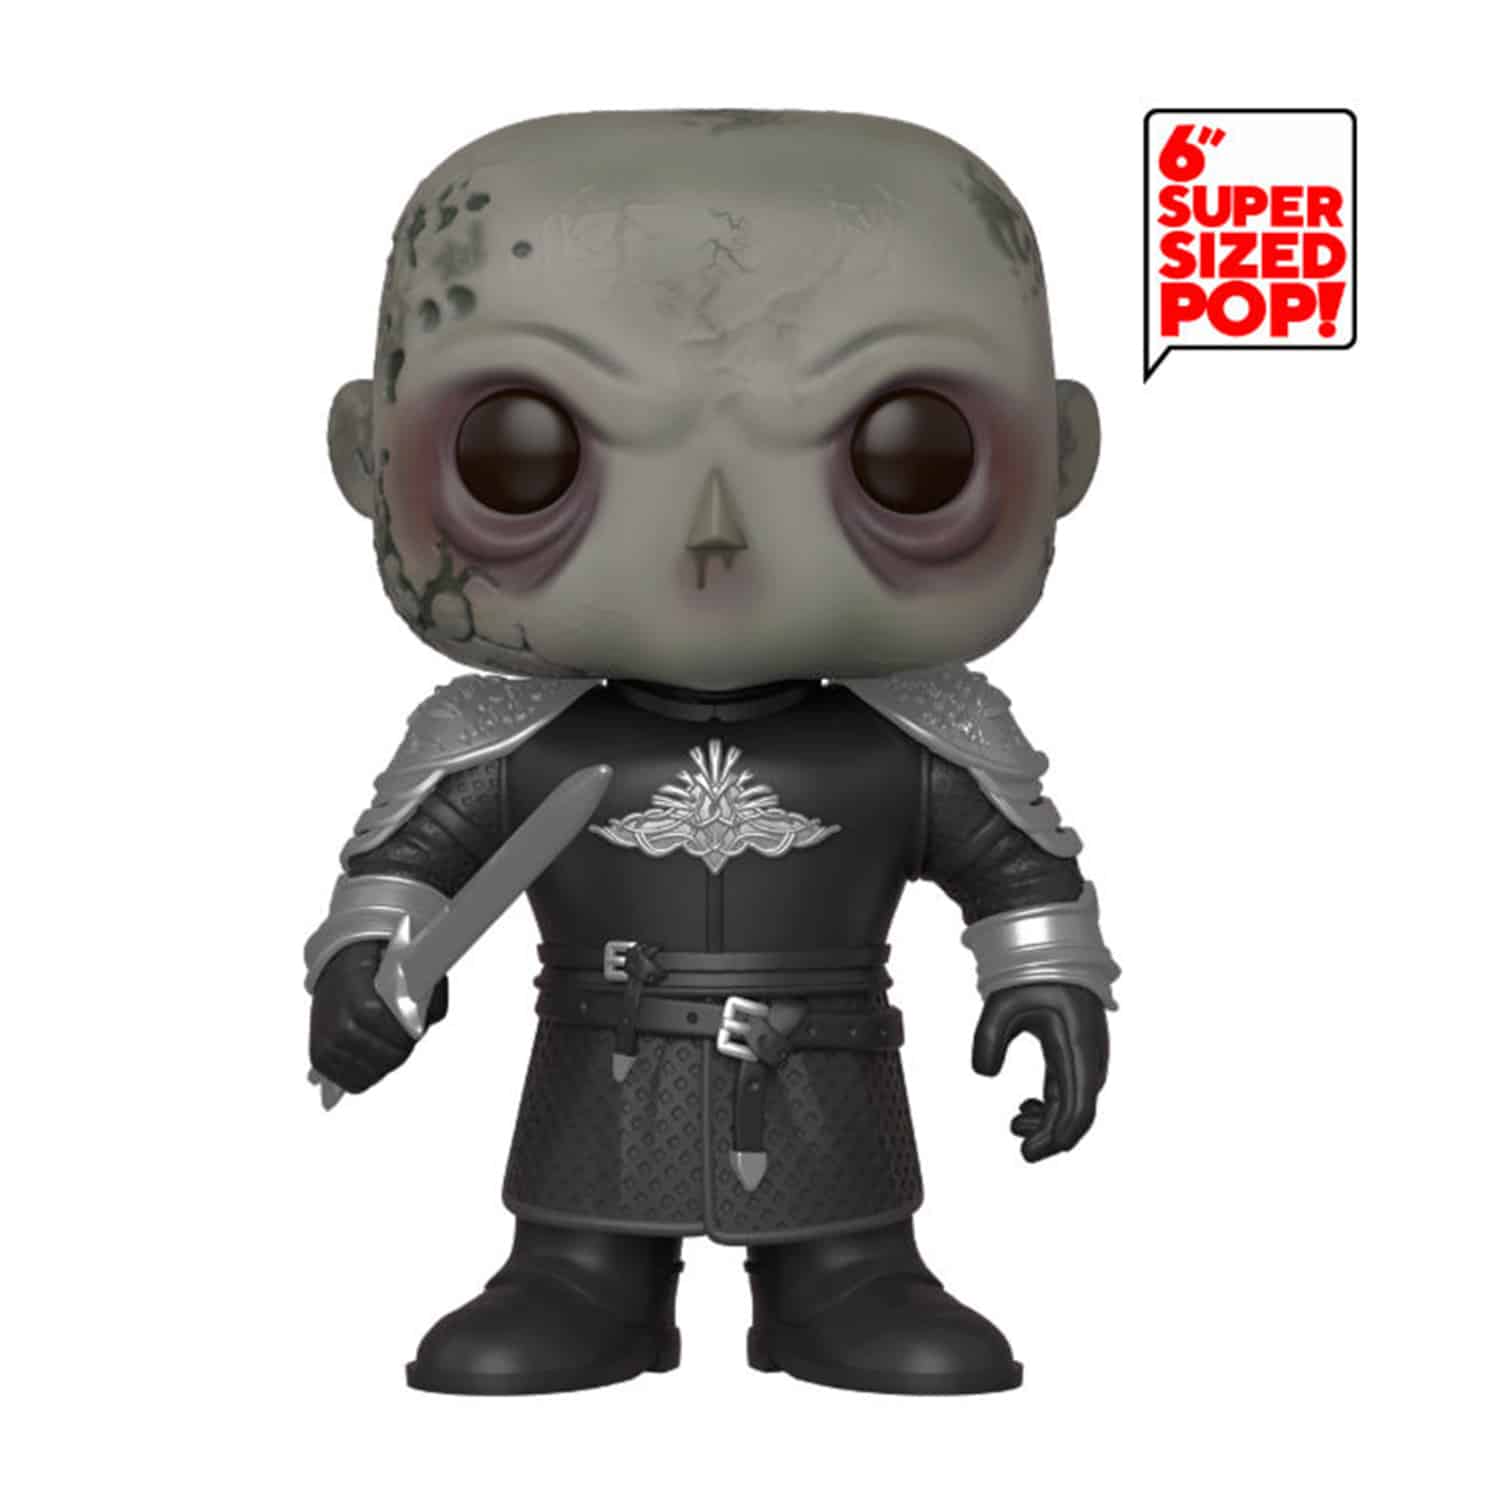 Game of Thrones - The Mountain Unmasked Funko Pop! Super Sized